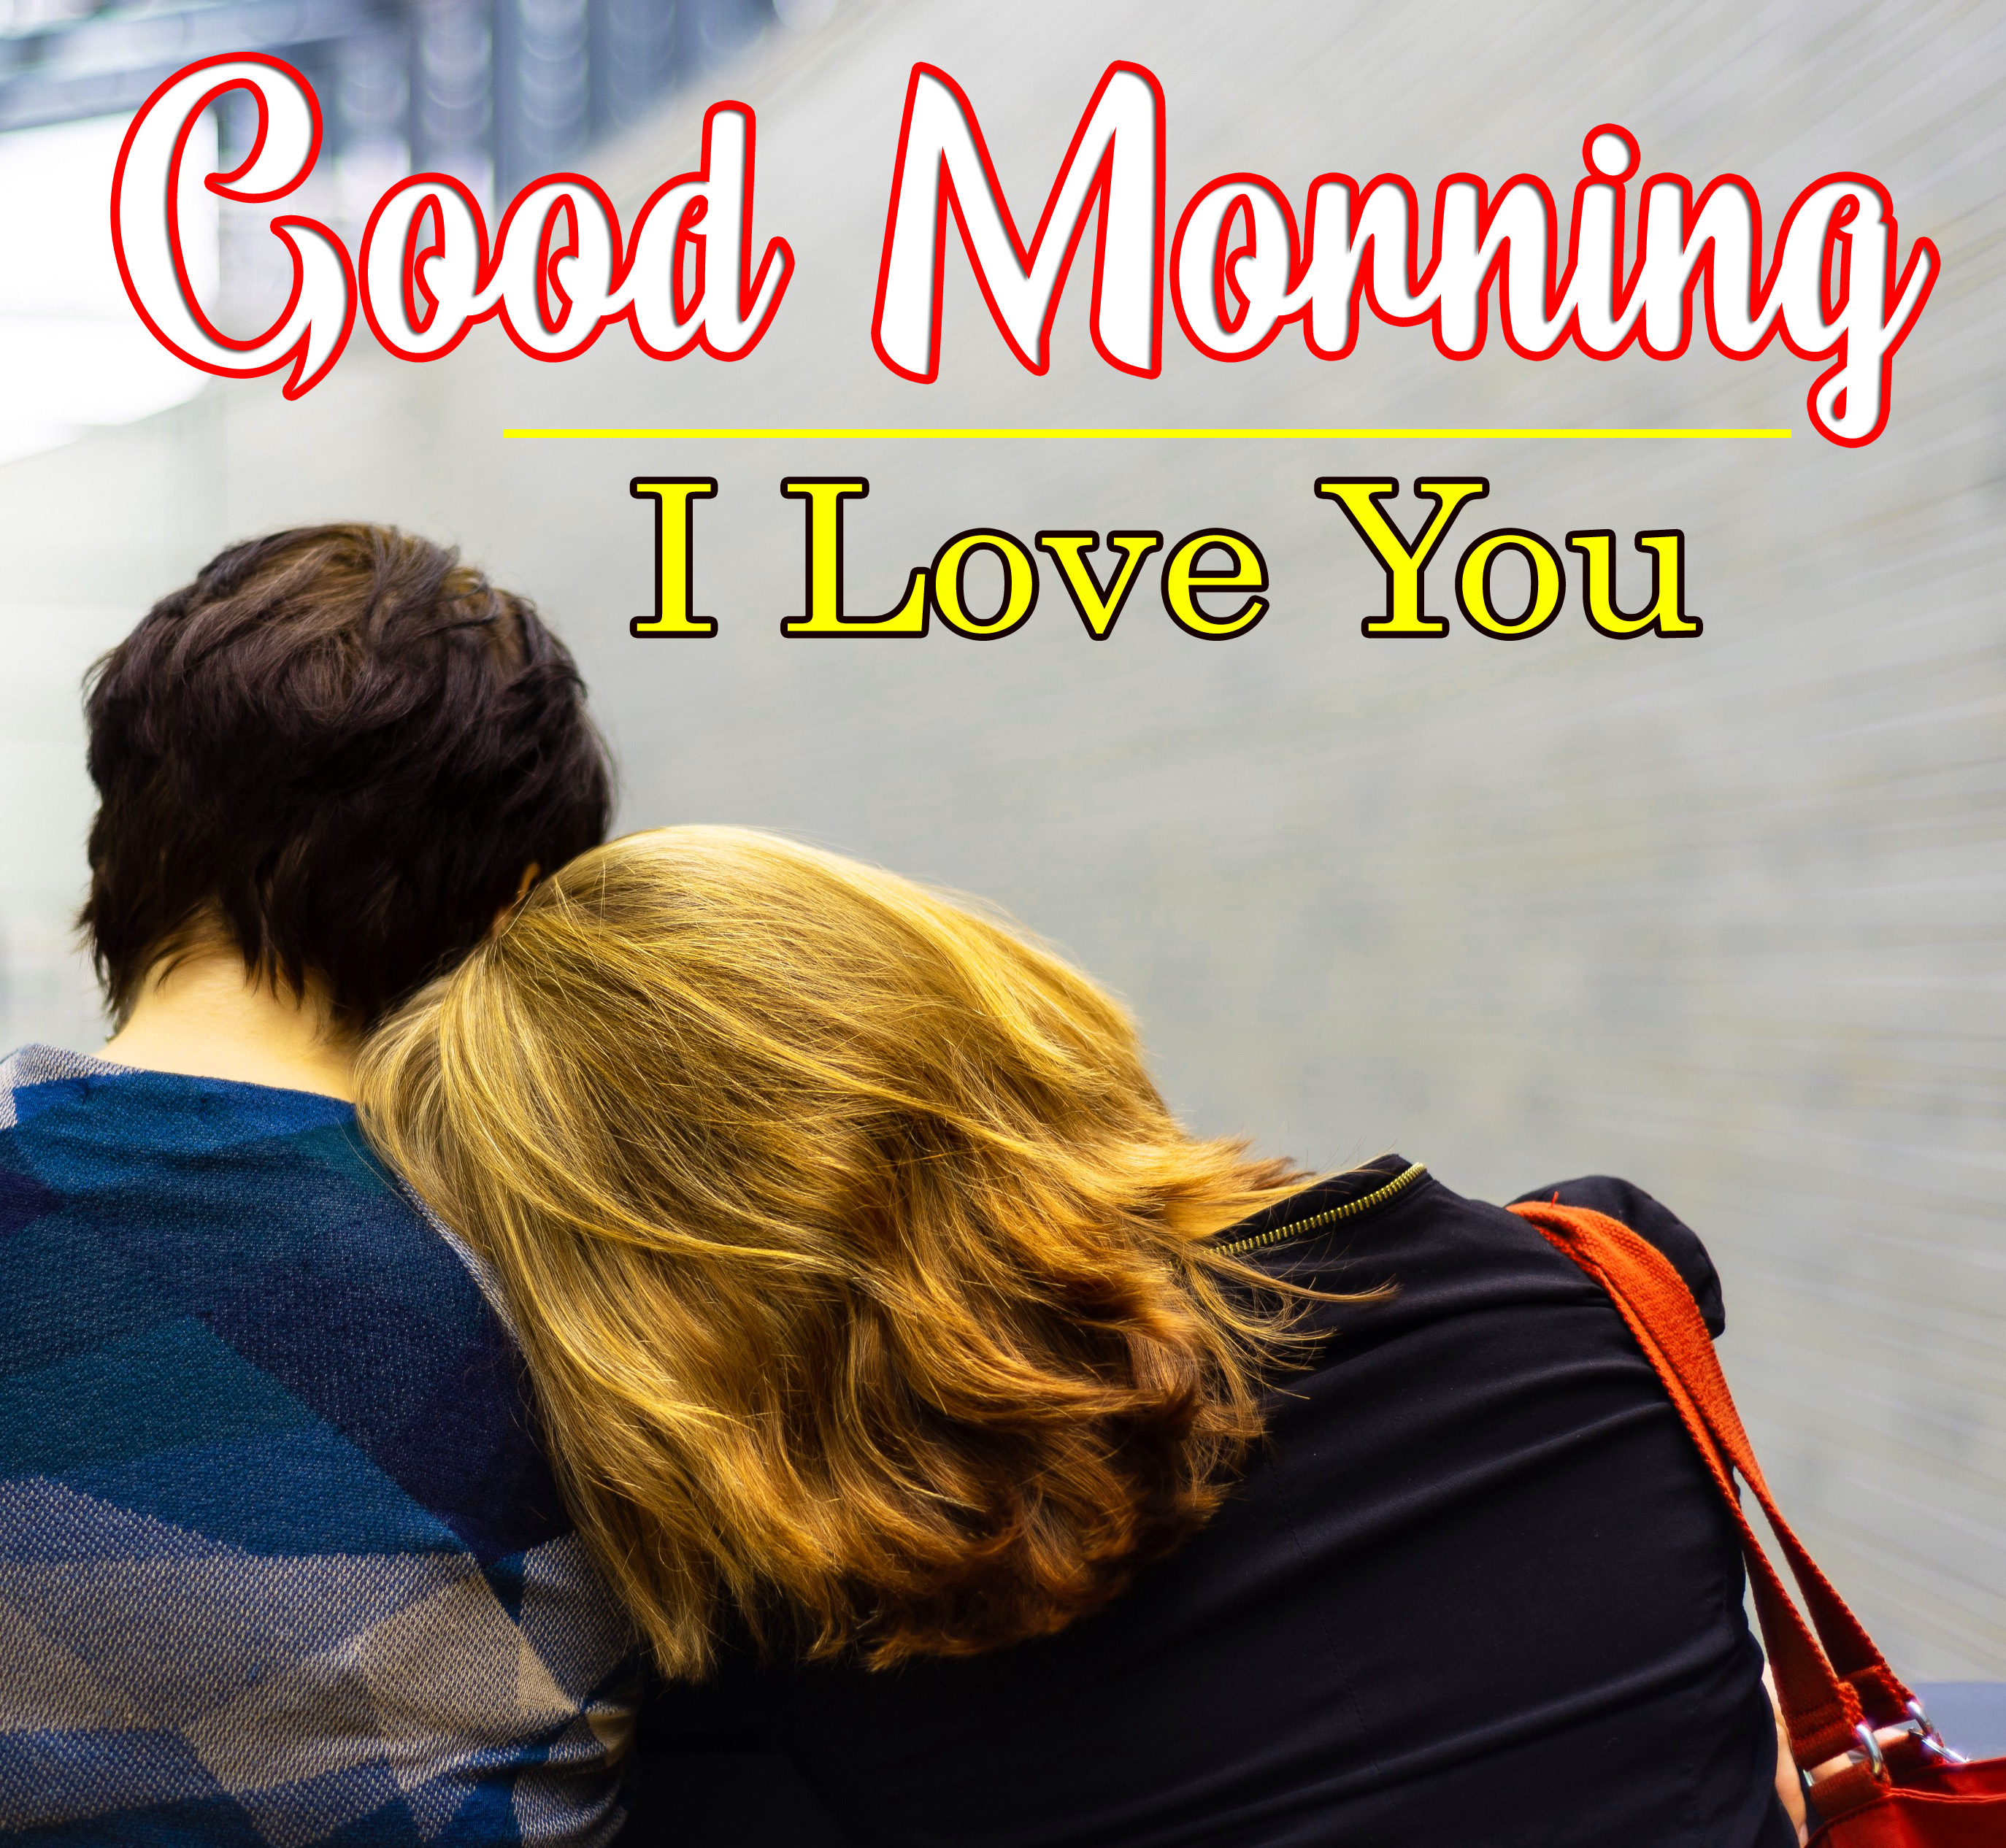 Romantic Good morning Images